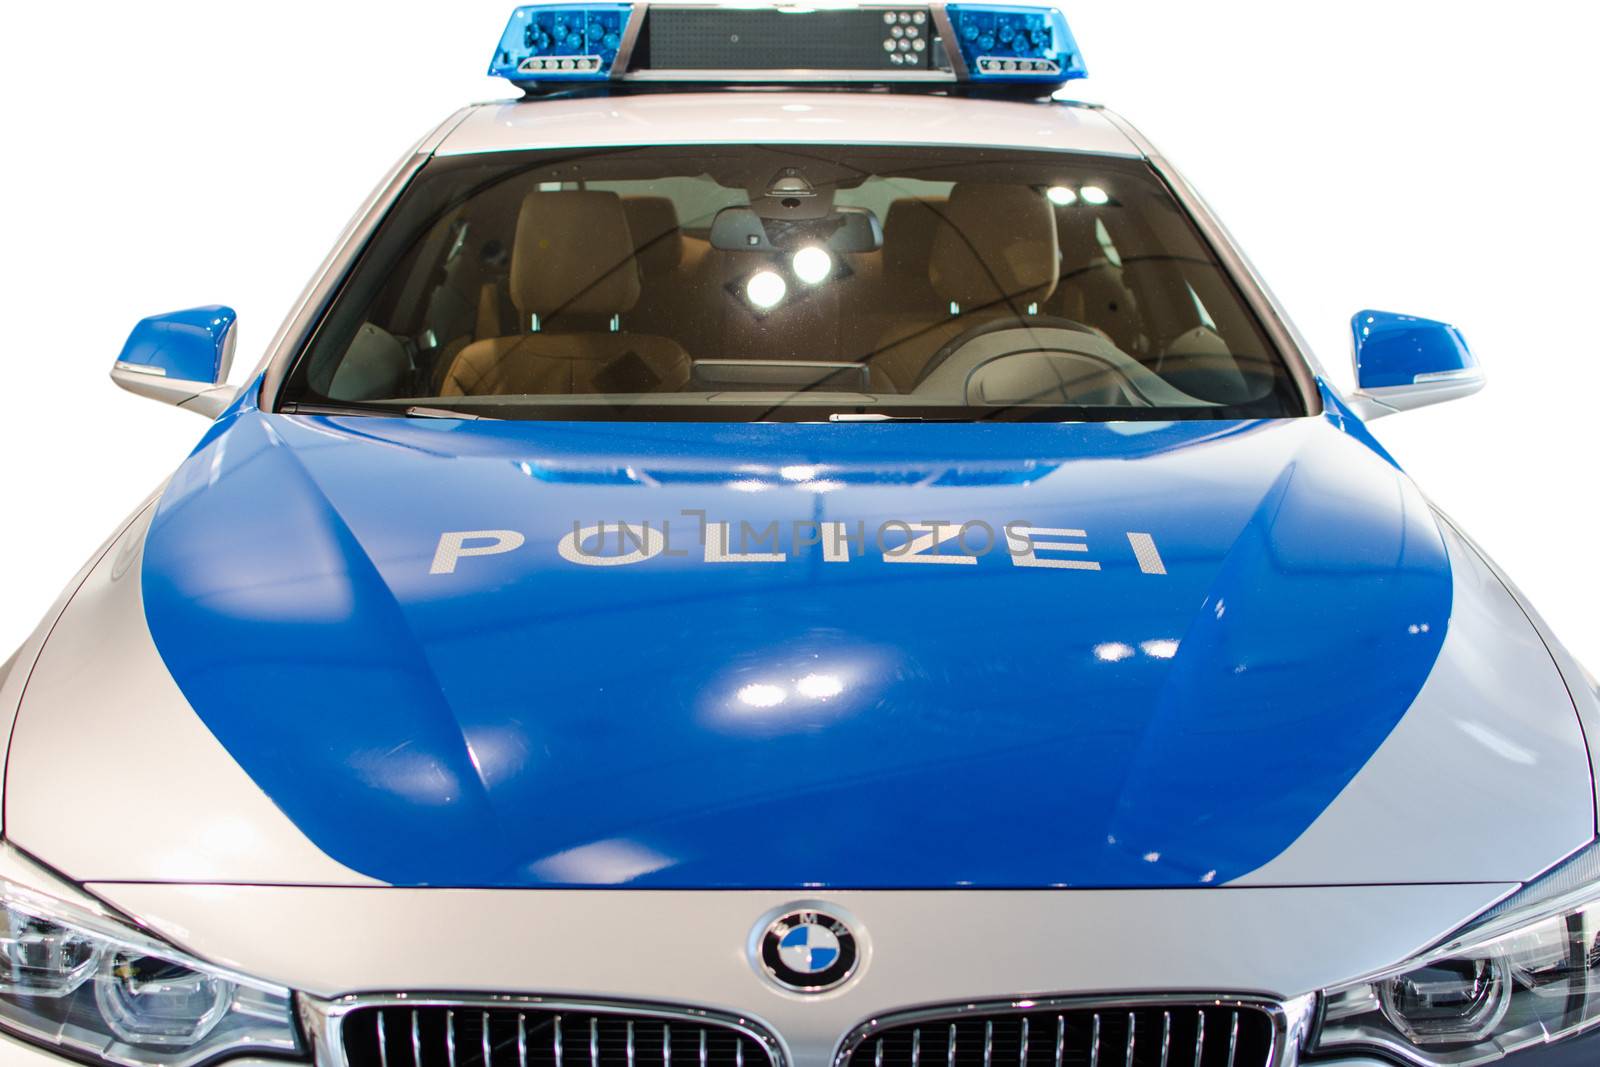 MUNICH, GERMANY - DECEMBER 27, 2013: New modern model of German police duty patrol BMW car. Closeup front view isolated on white.